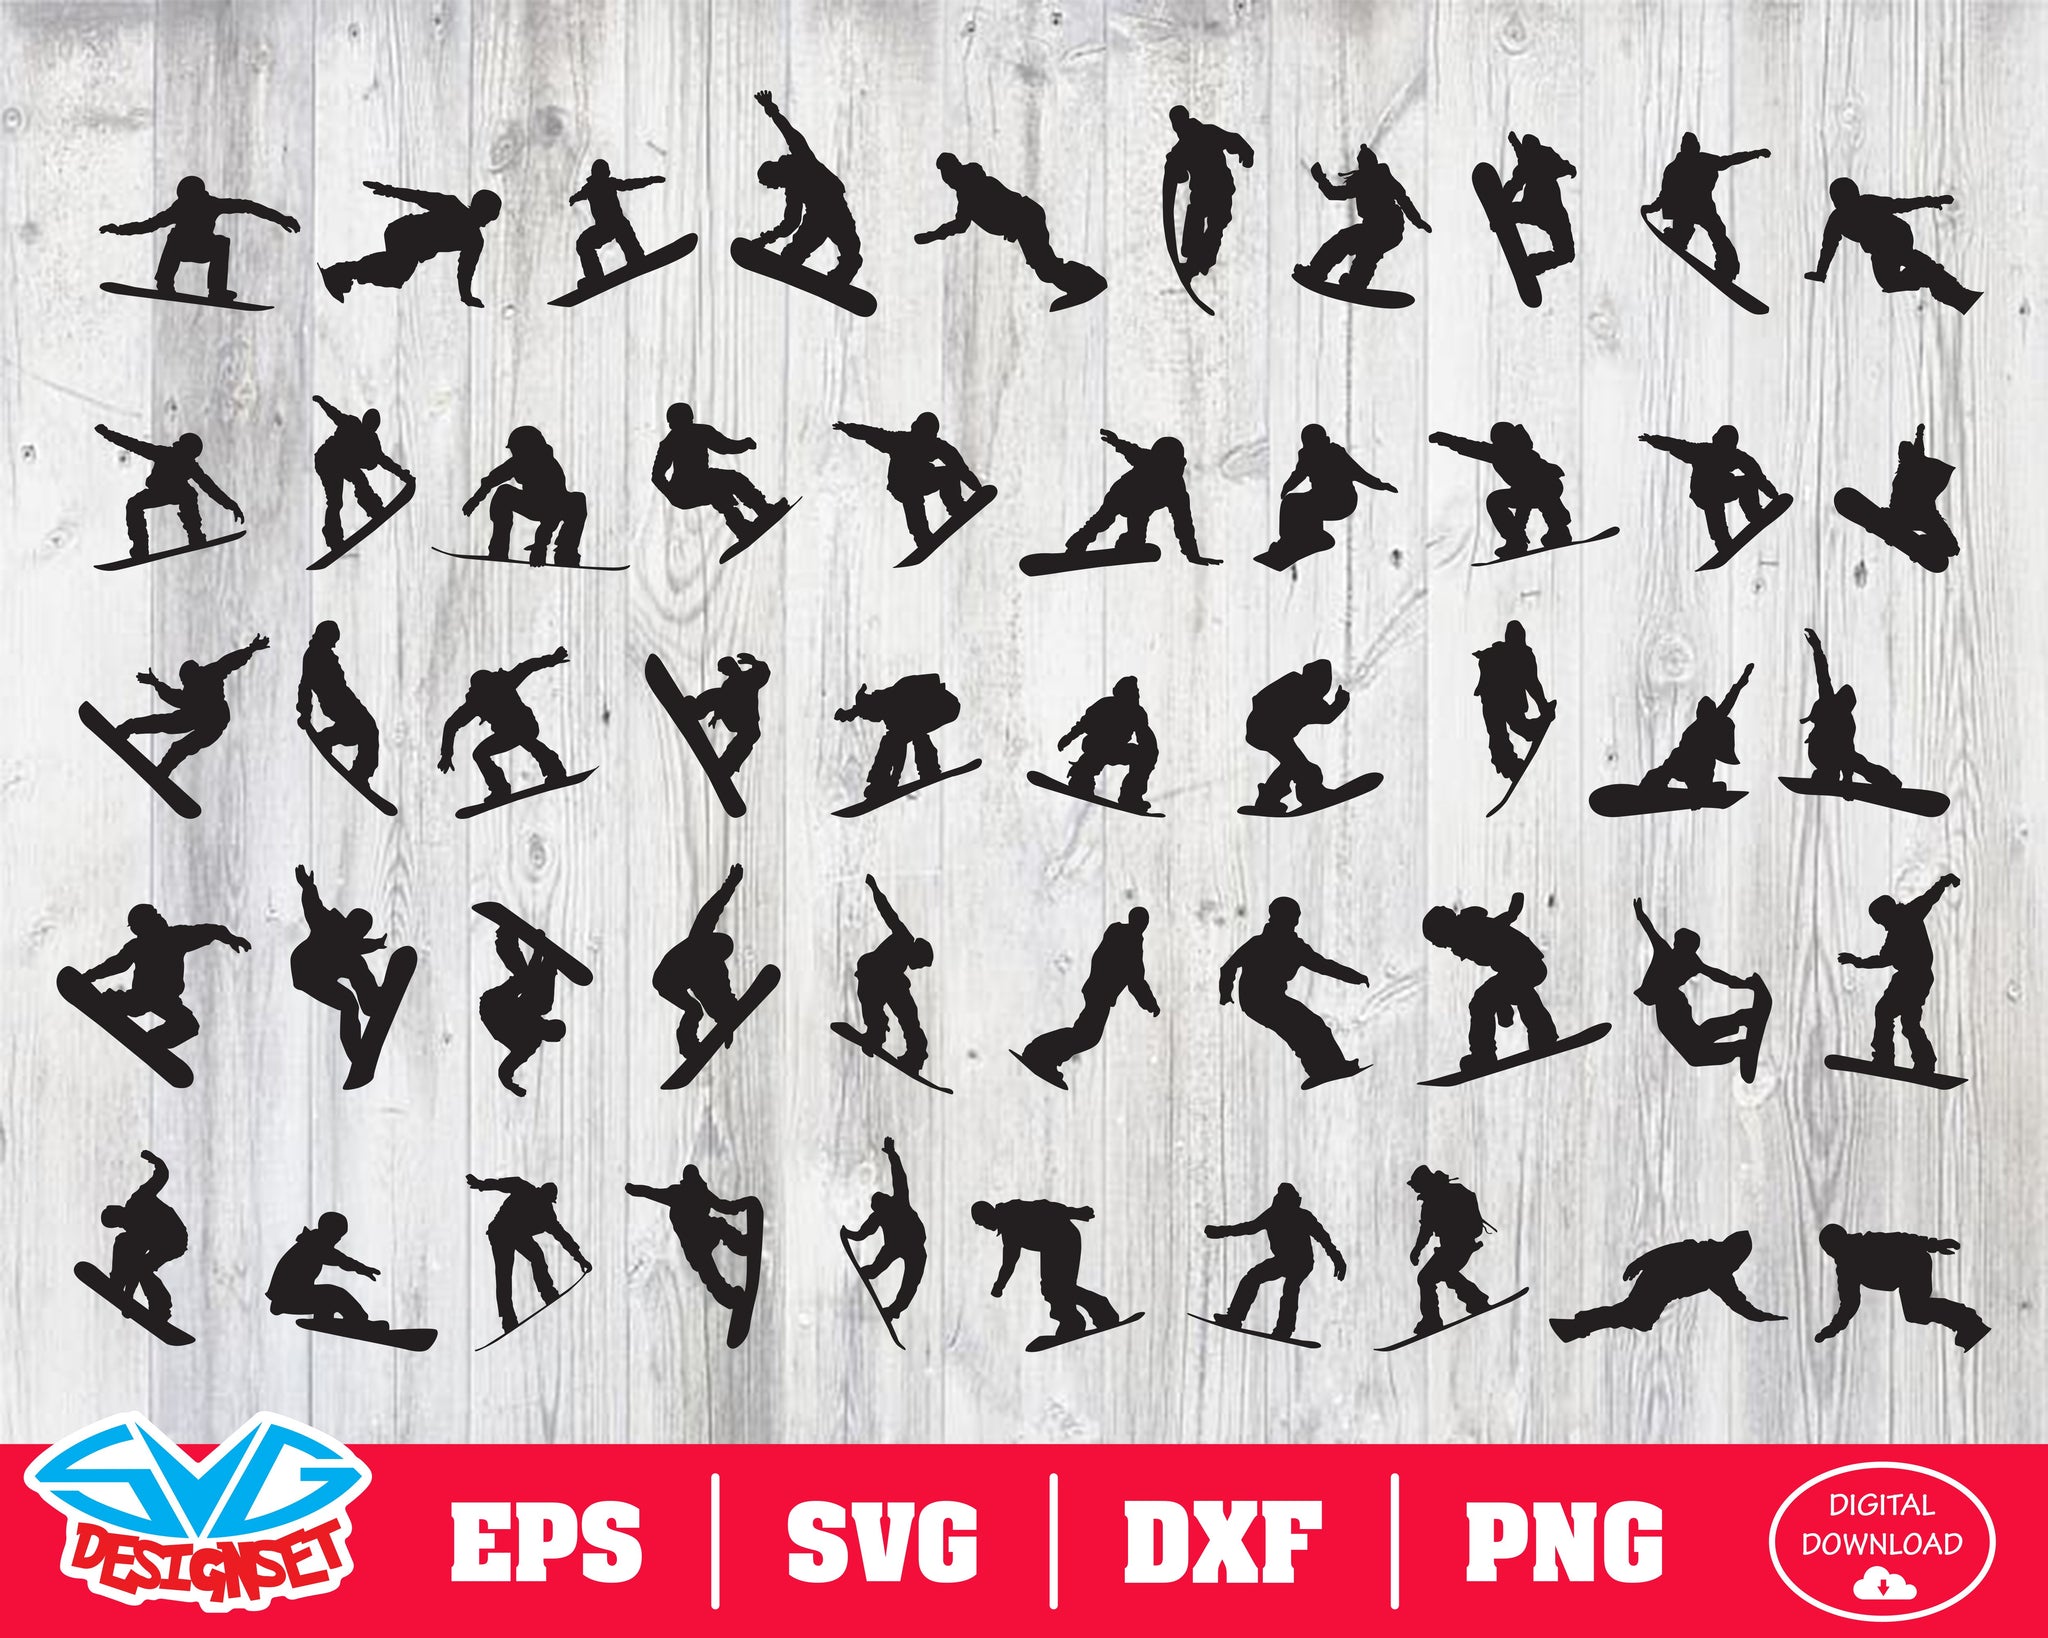 Snowboarder Svg, Dxf, Eps, Png, Clipart, Silhouette and Cutfiles - SVGDesignSets